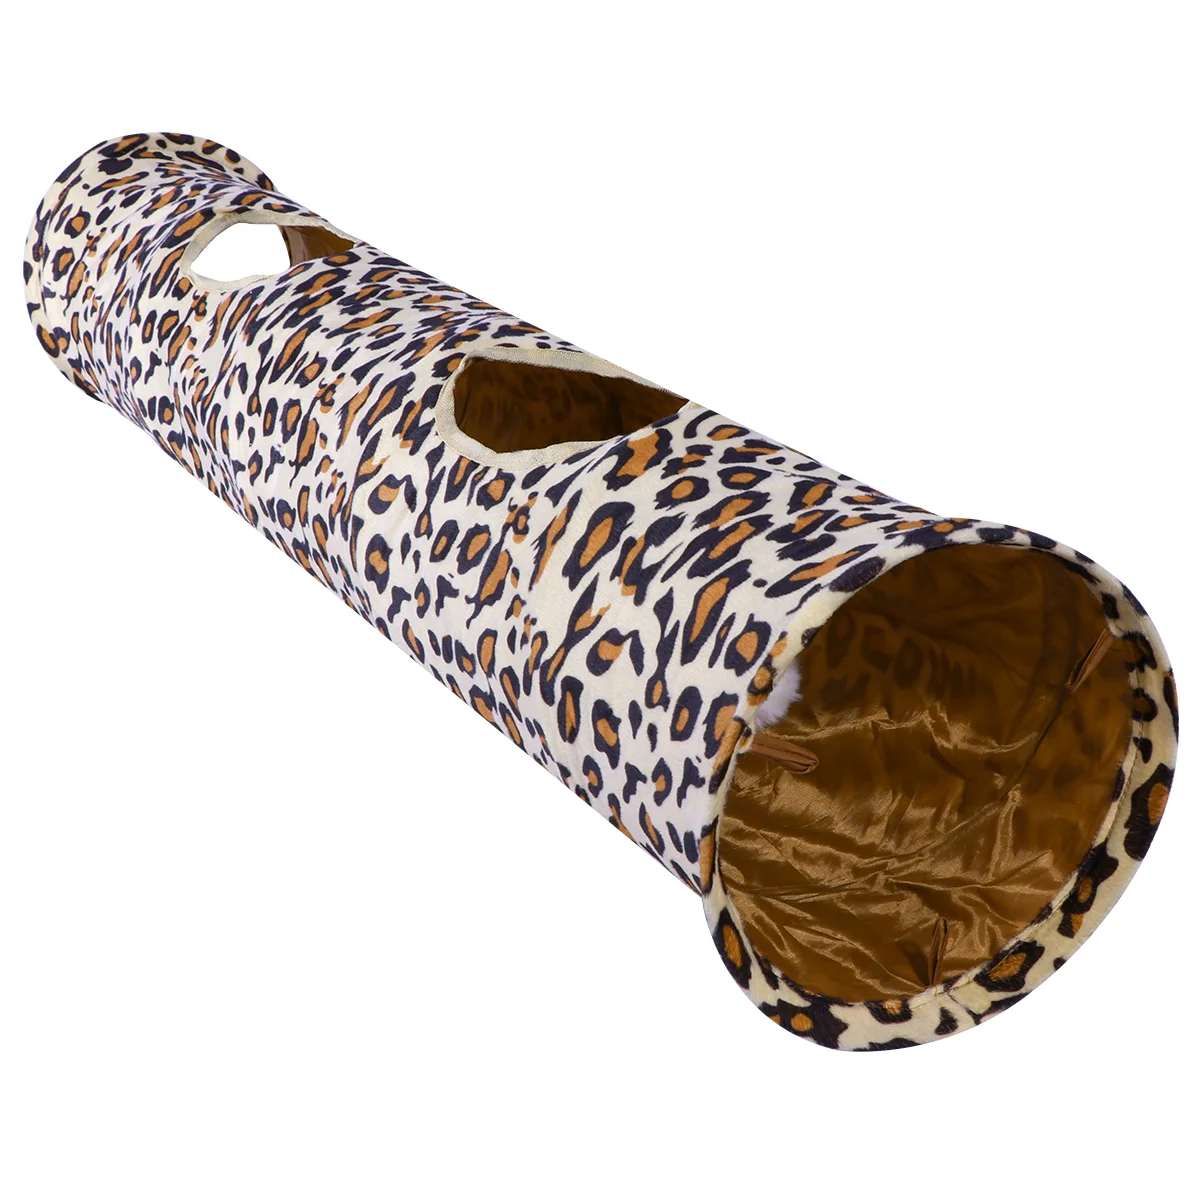 

Collapsible Cat Tunnel Play Foldable Tube, Cat Tunnels Ferret Tunnels and Tubes Tube Fun for Rabbits, Kittens and Small Animals